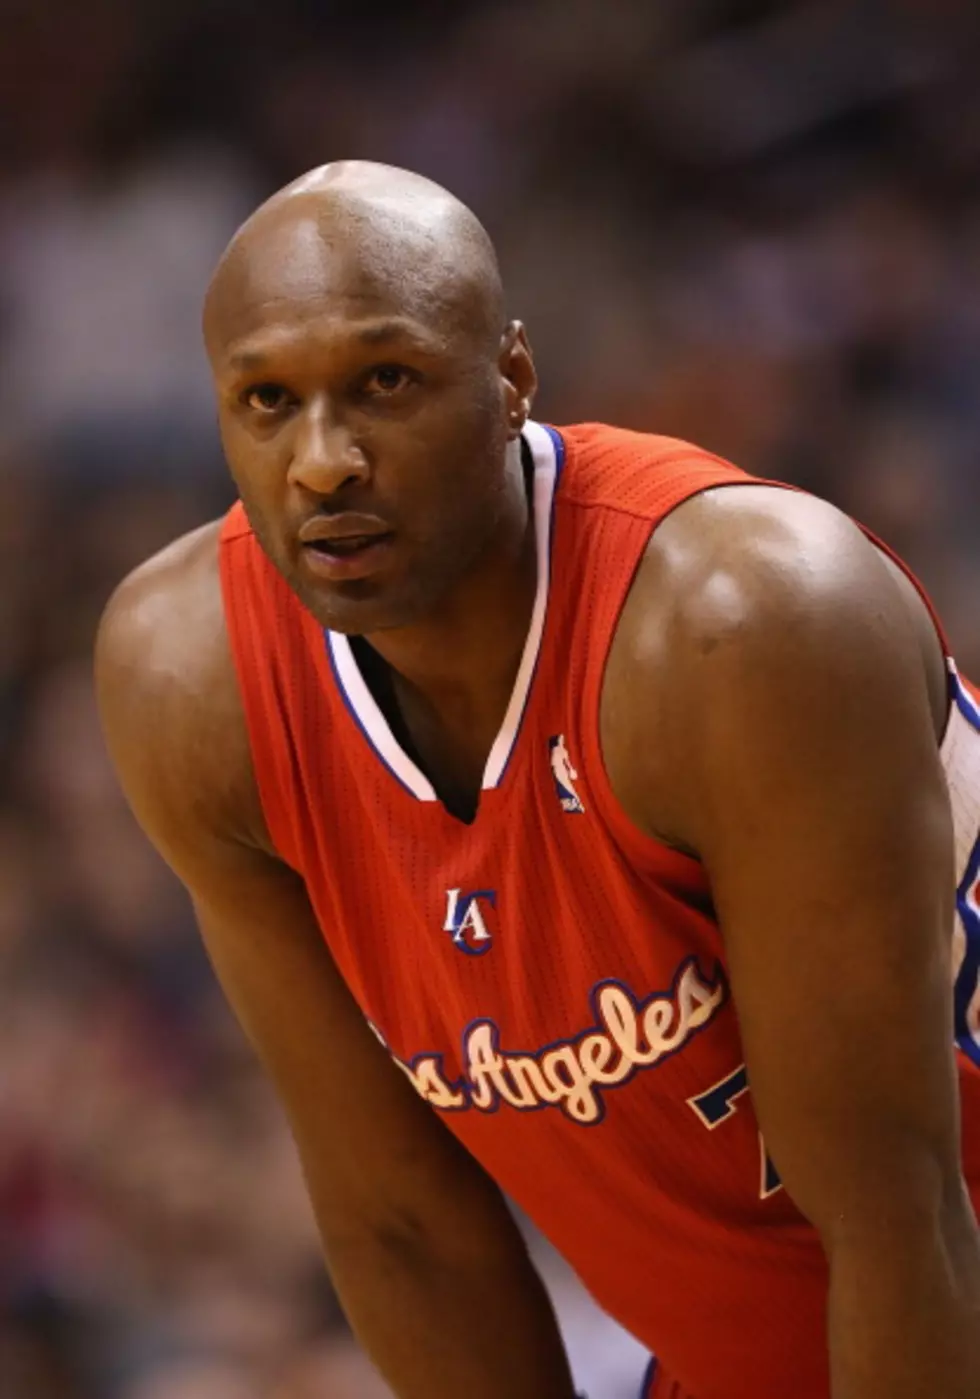 Latest On Lamar Odom As He Fights For His Life – Tha Wire [VIDEO]